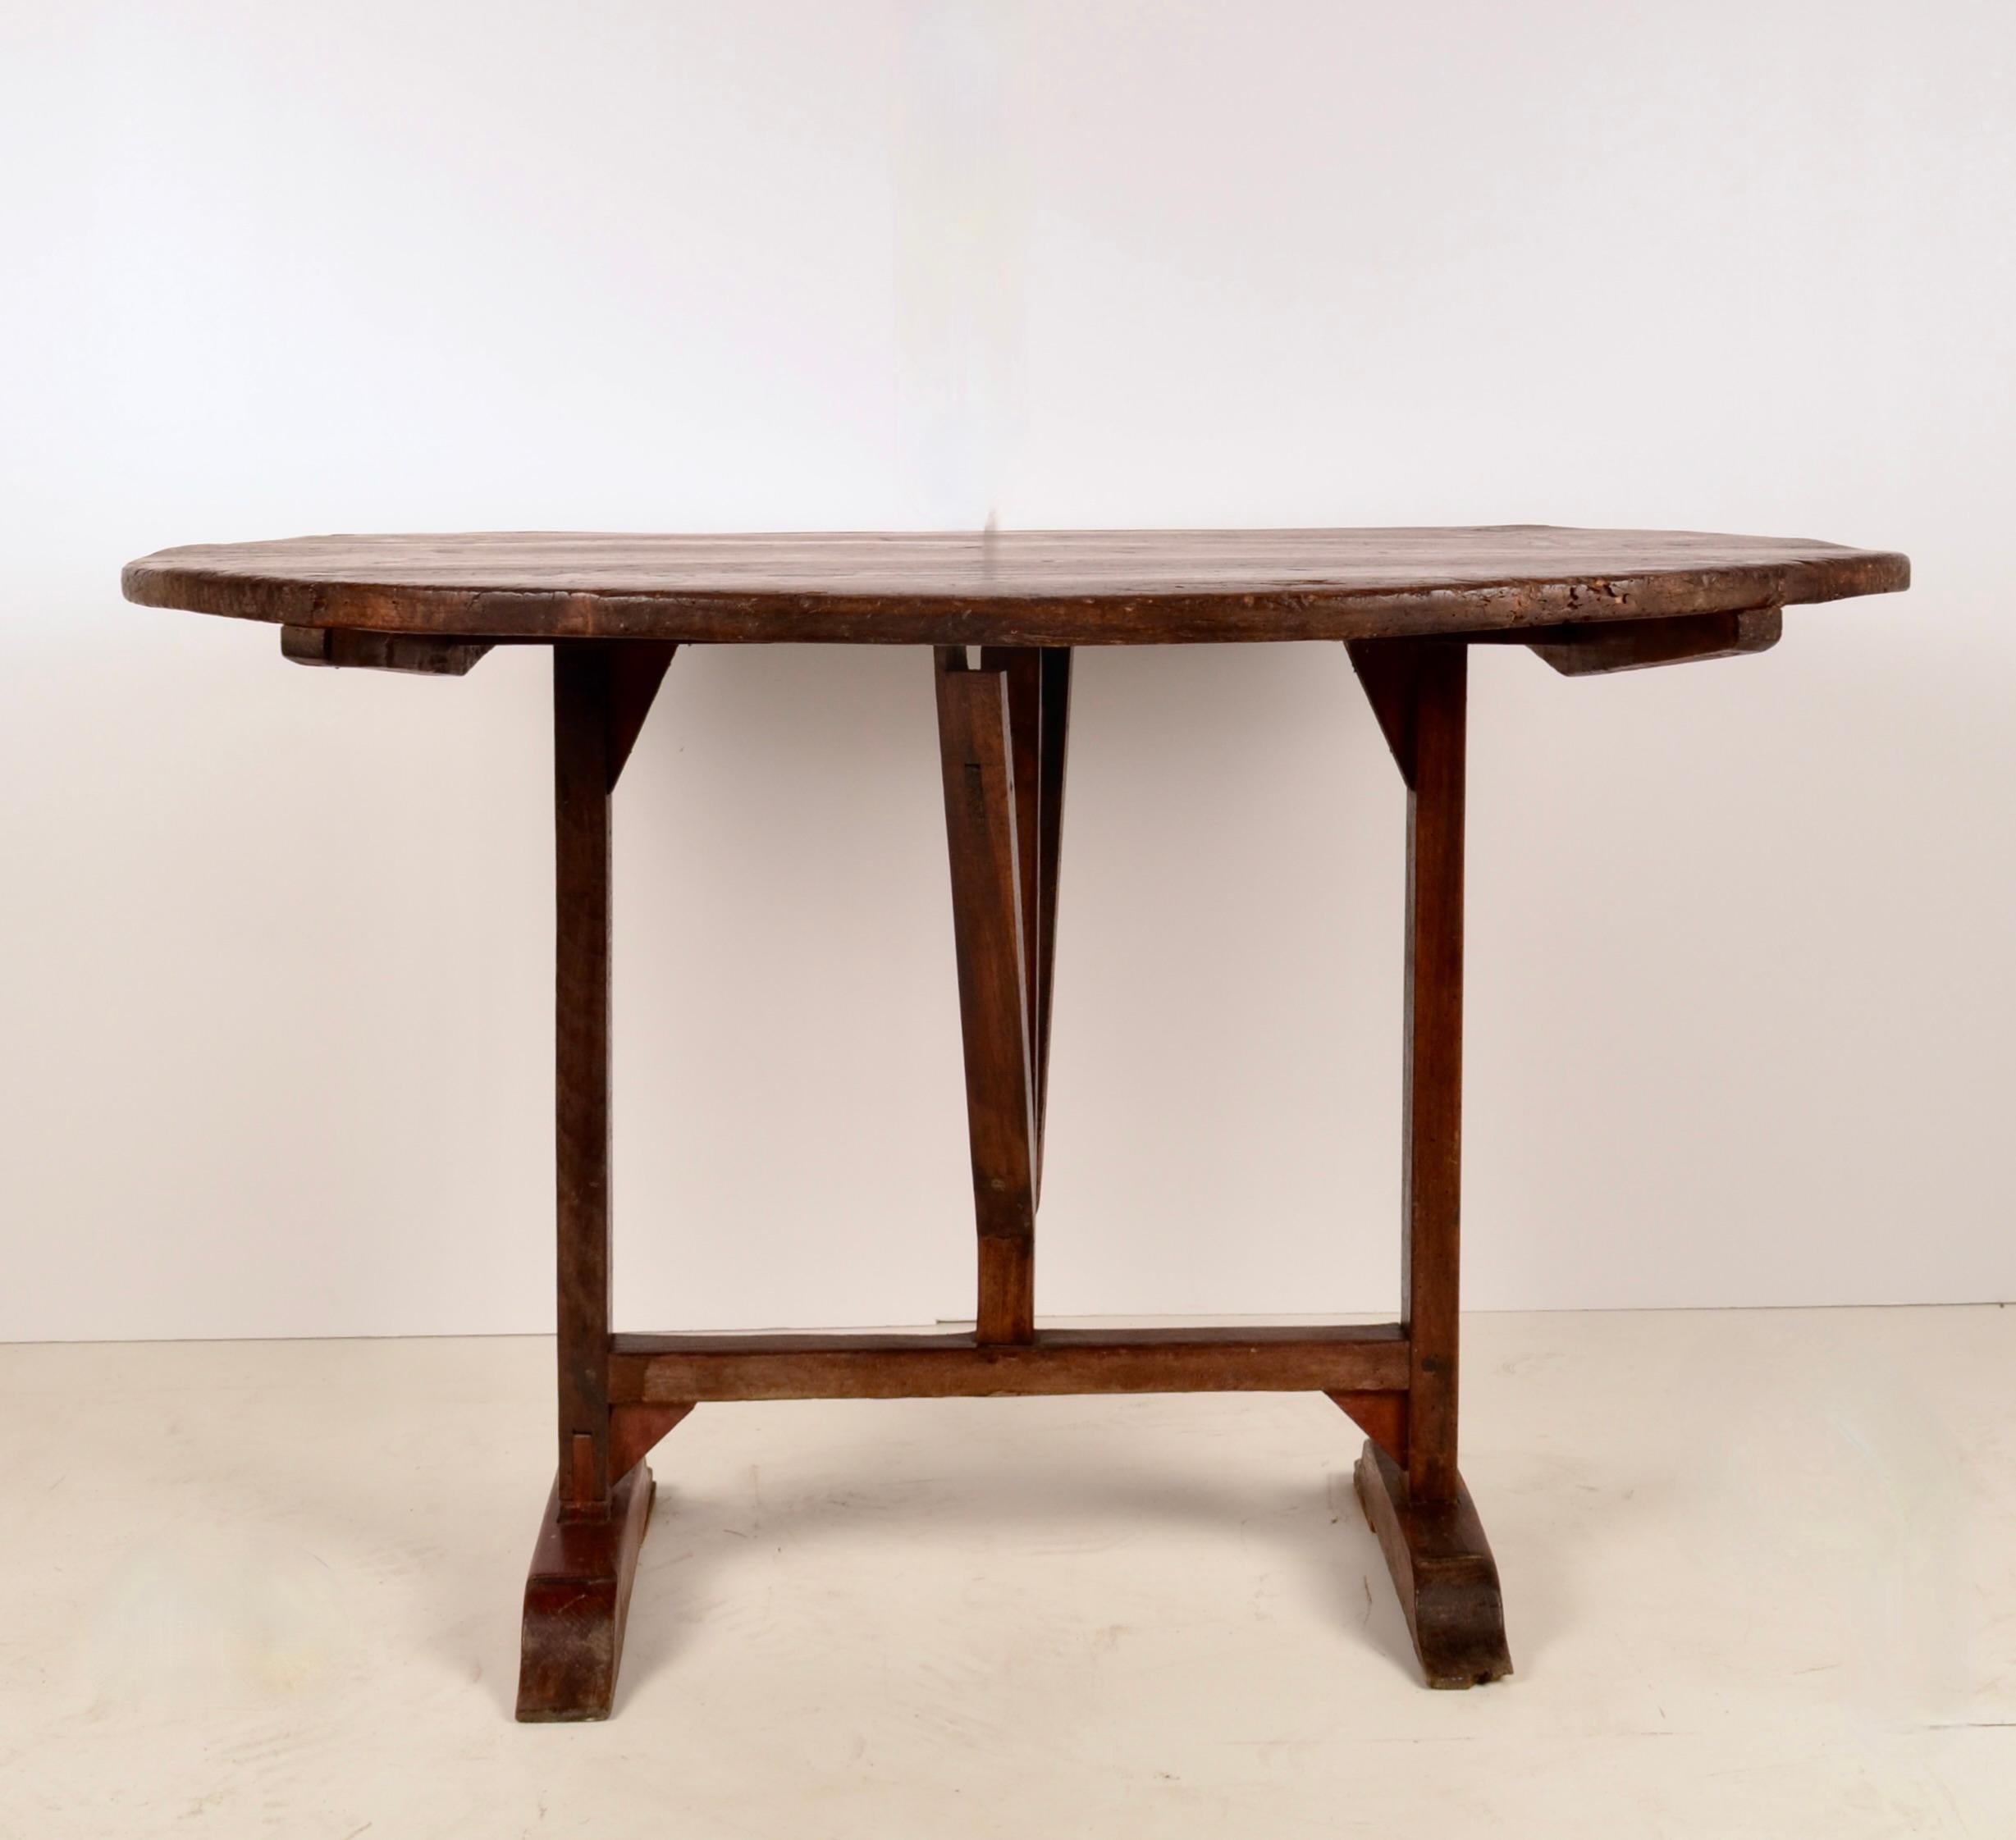 A fine vintage example of a traditional French wine tasting table in oak. The tilting top and swing base allow the piece to be easily stored but drops to be a sturdy table. This table has the traditional base in good condition, and a beautiful